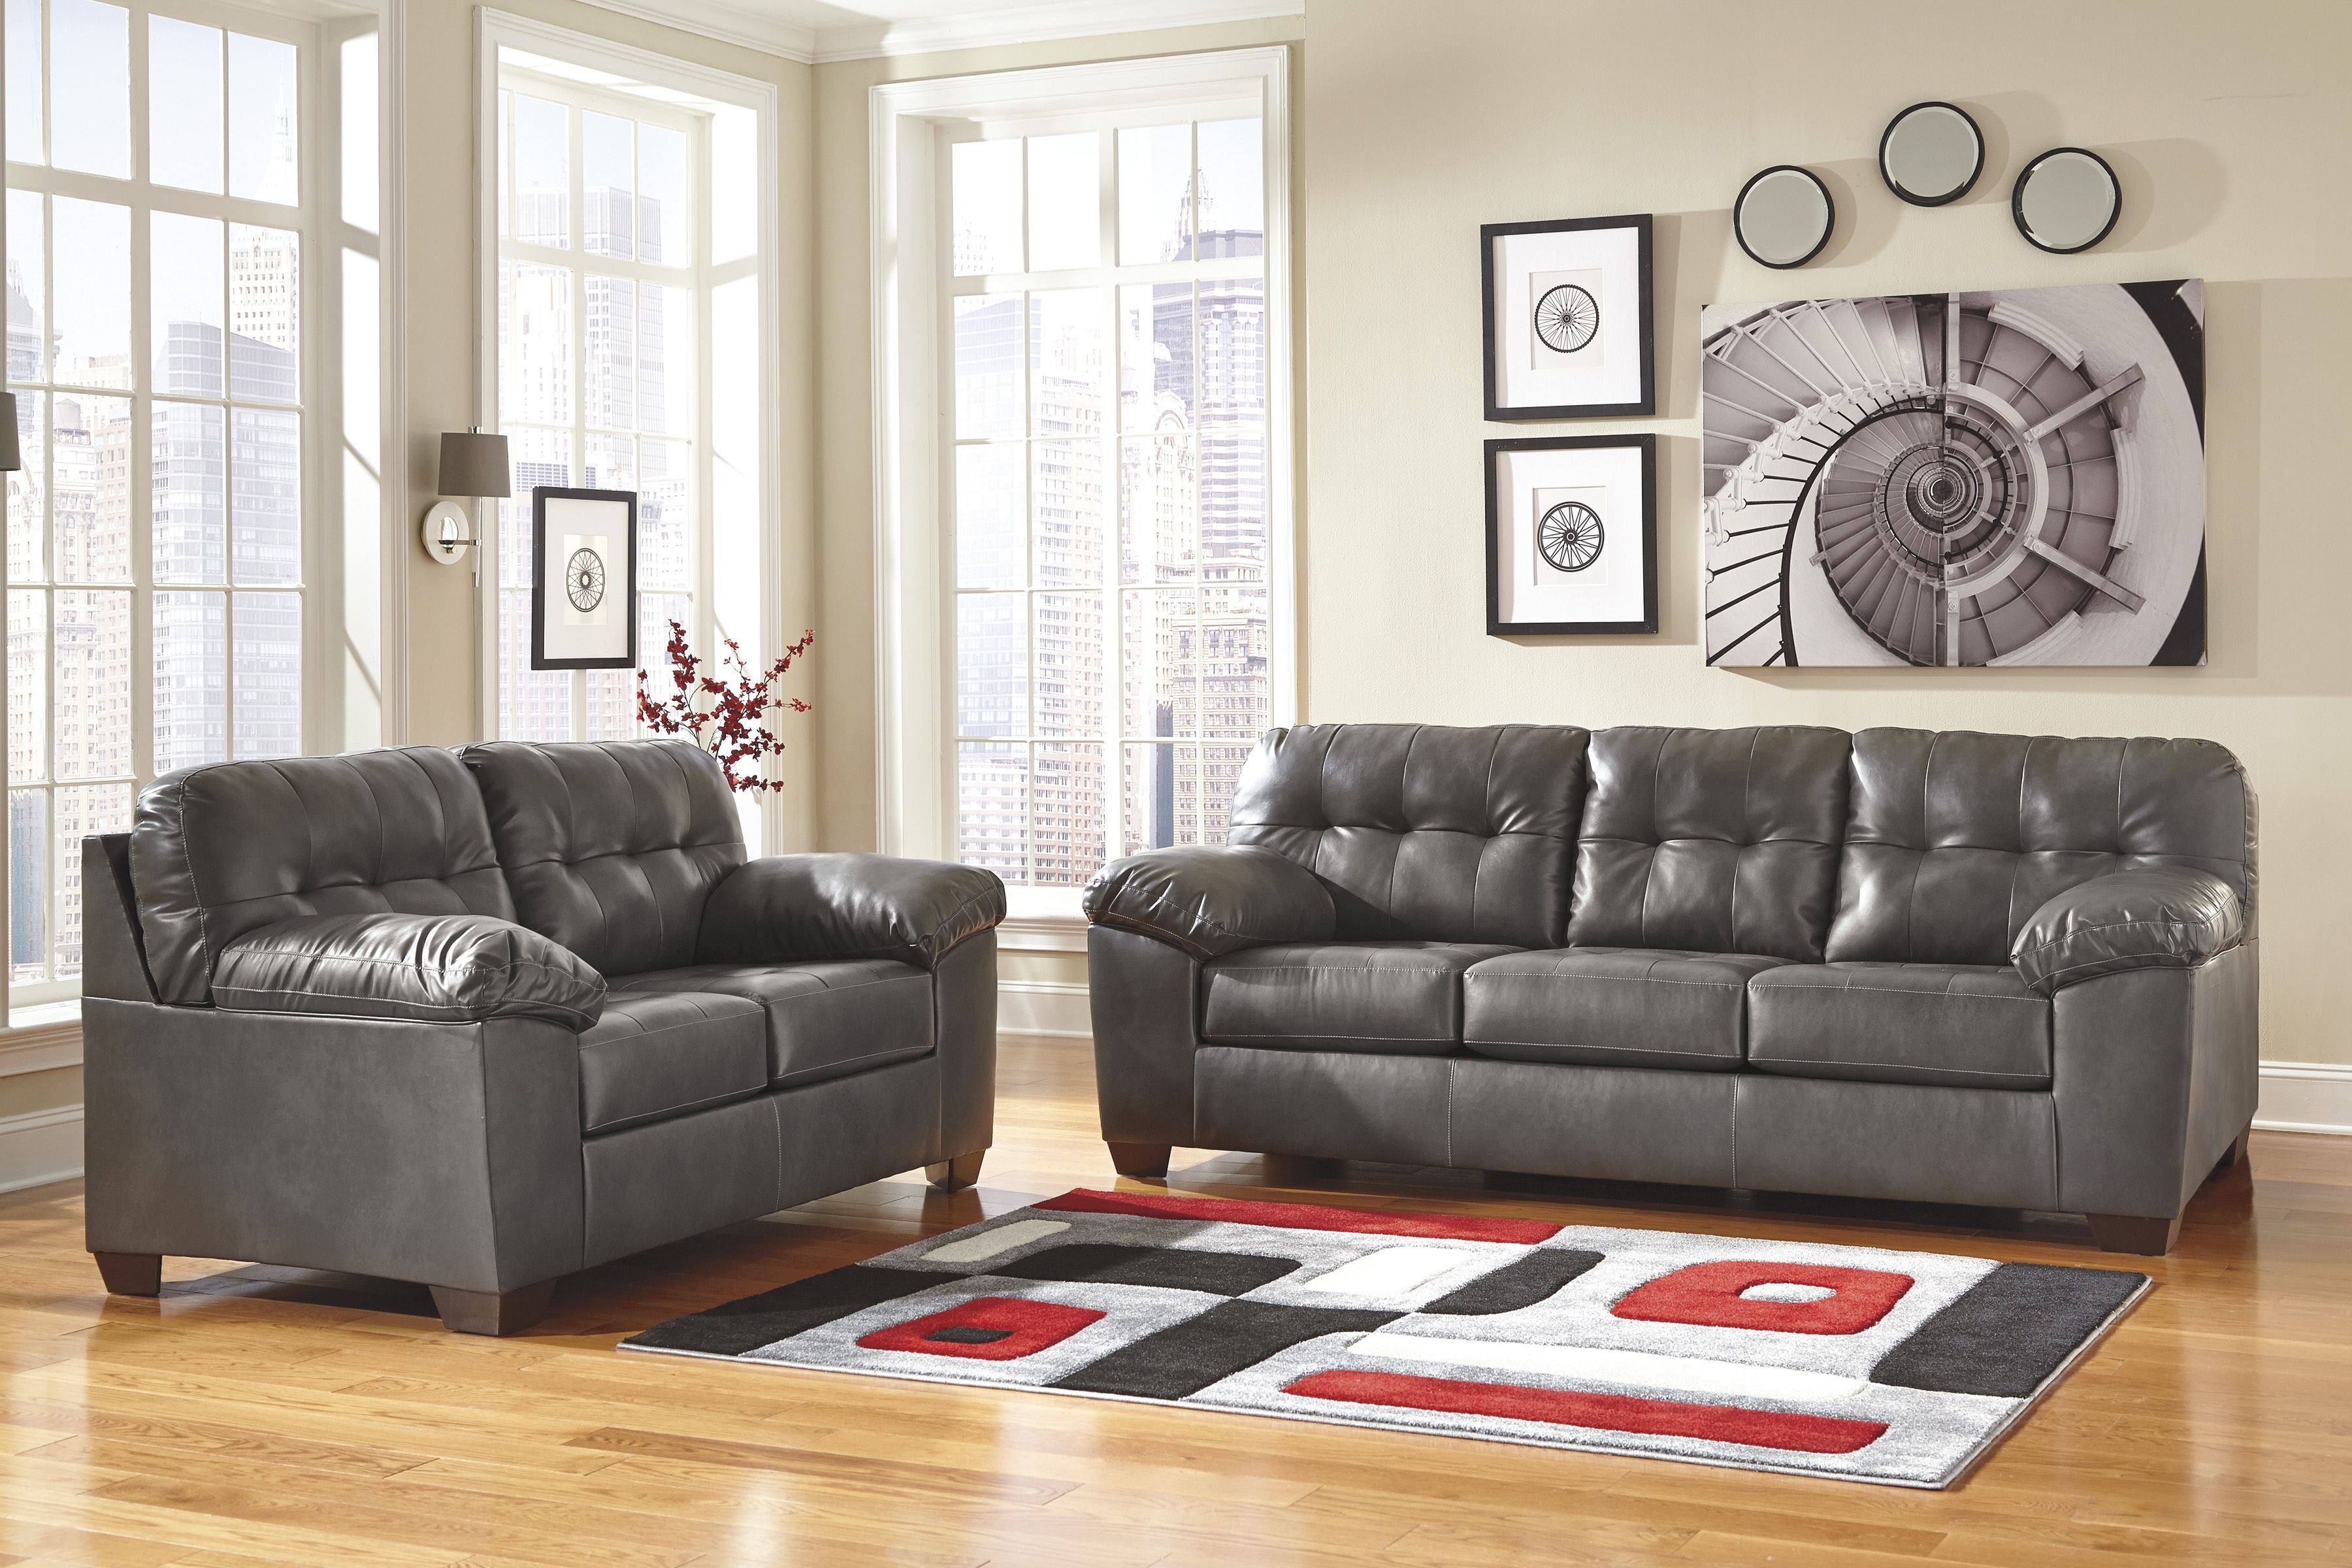 Sectional Sofas At Chicago With 2019 Furniture: White Sectional Couch (View 14 of 20)